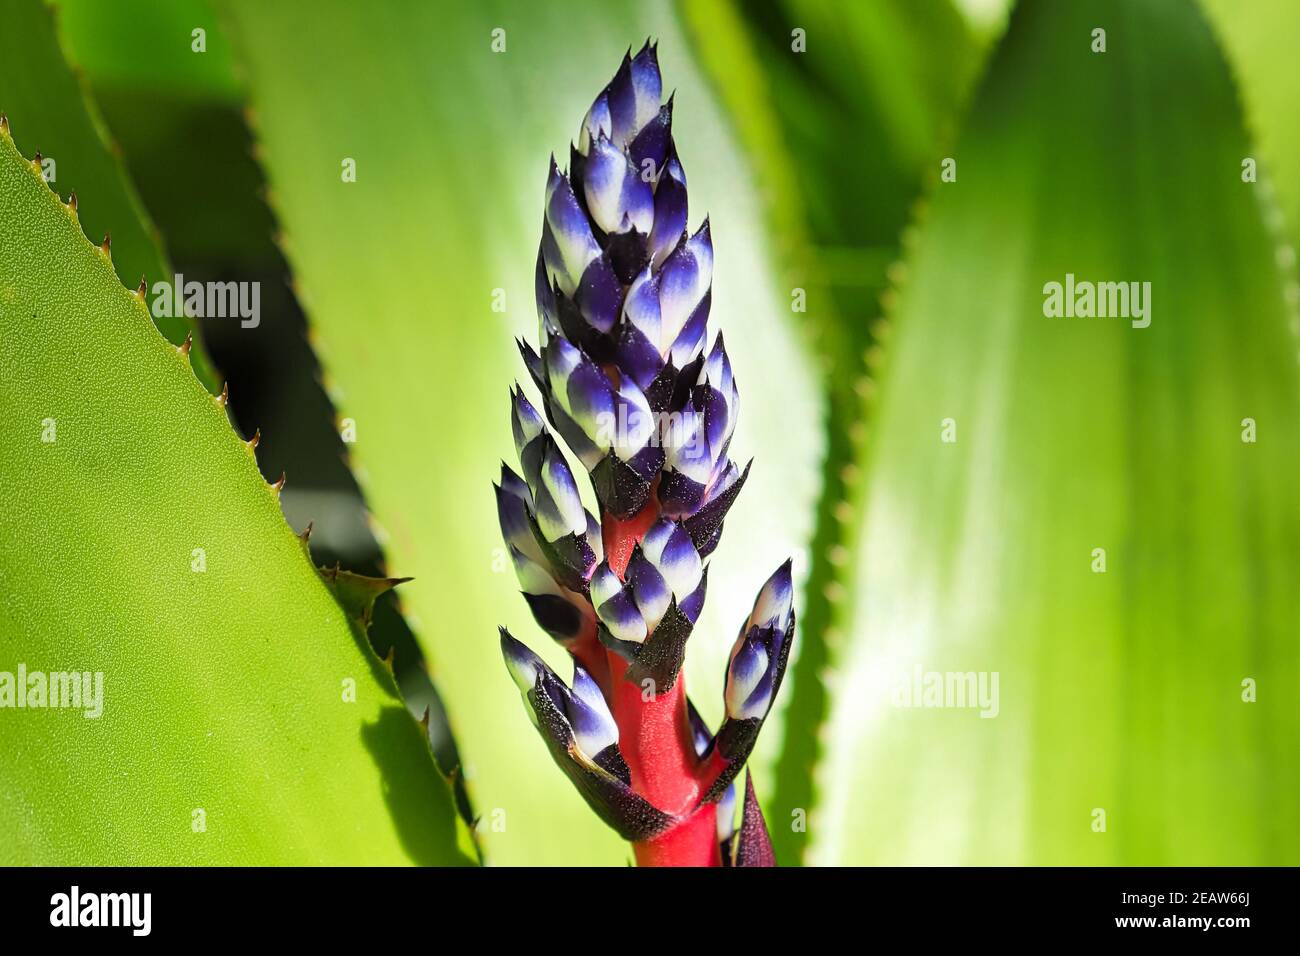 A flower blossom spear opening on a del mar aechmea Stock Photo